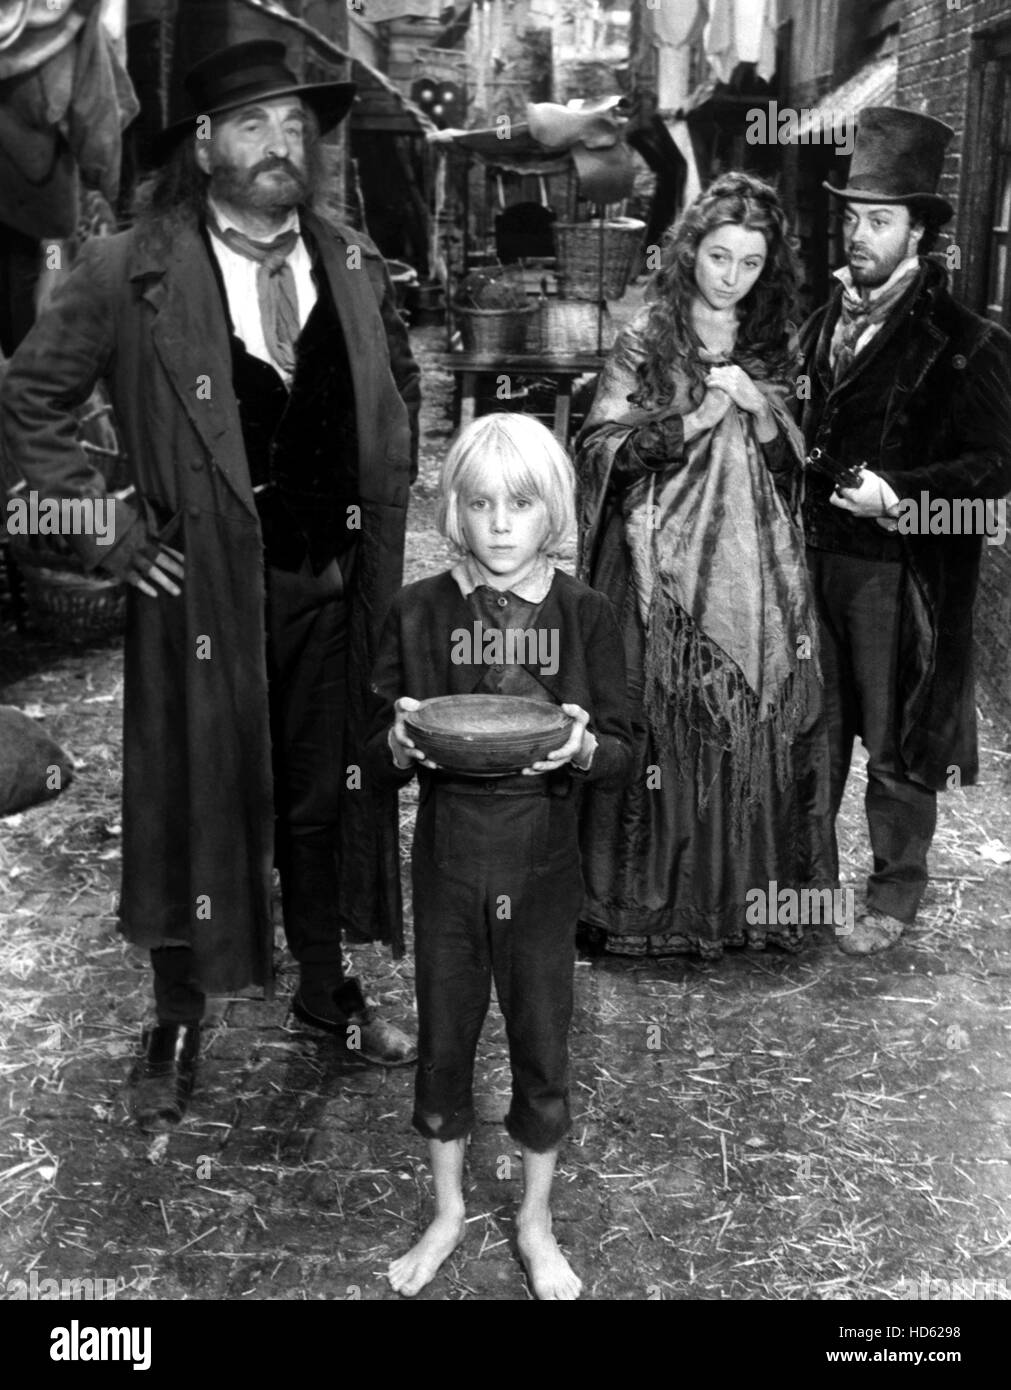 OLIVER TWIST, George C. Scott, Richard Charles, Cherie Lunghi, Tim Curry,  1982. © CBS / Courtesy: Everett Collection Stock Photo - Alamy